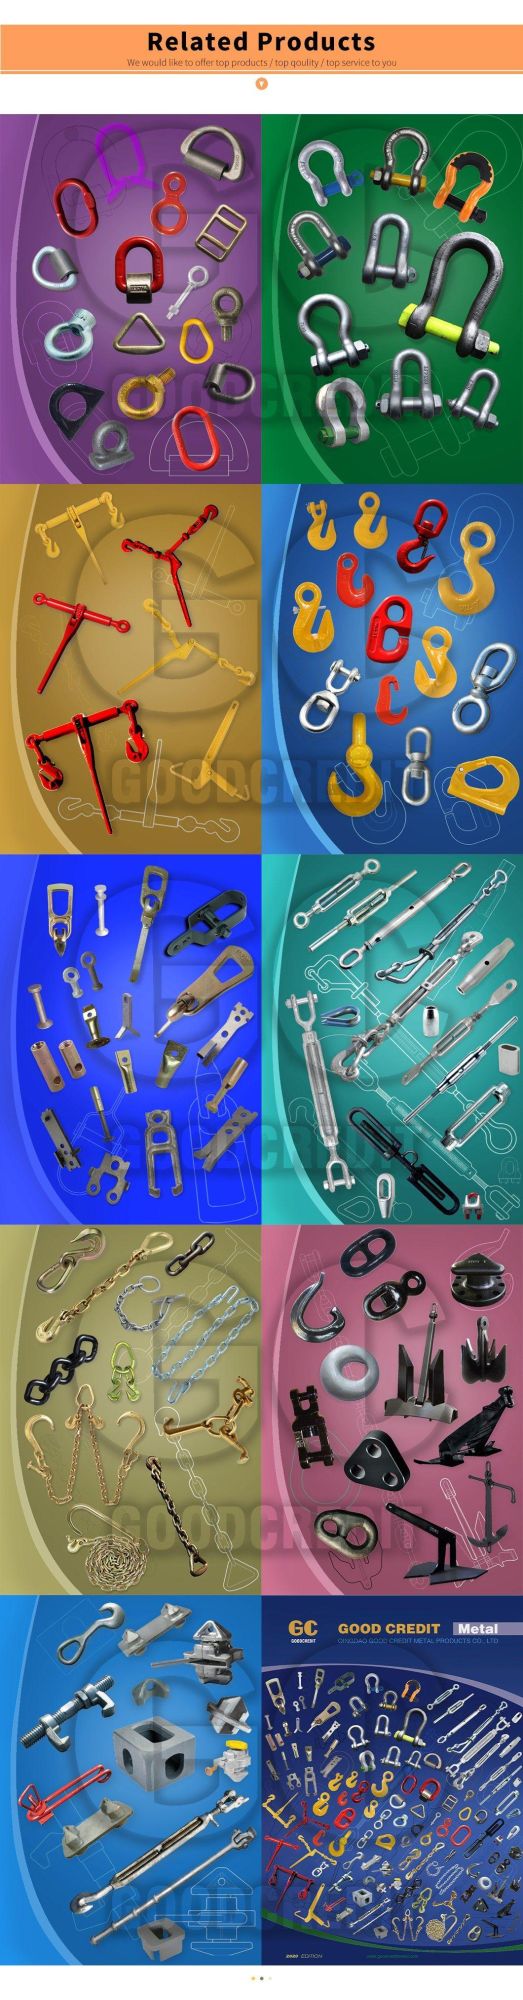 U. S. Type Galv Malleable Wire Rope Clips, Rigging, Hardware, Rigging Hardware, Rigging Wire Clips, Wire Rope Clips